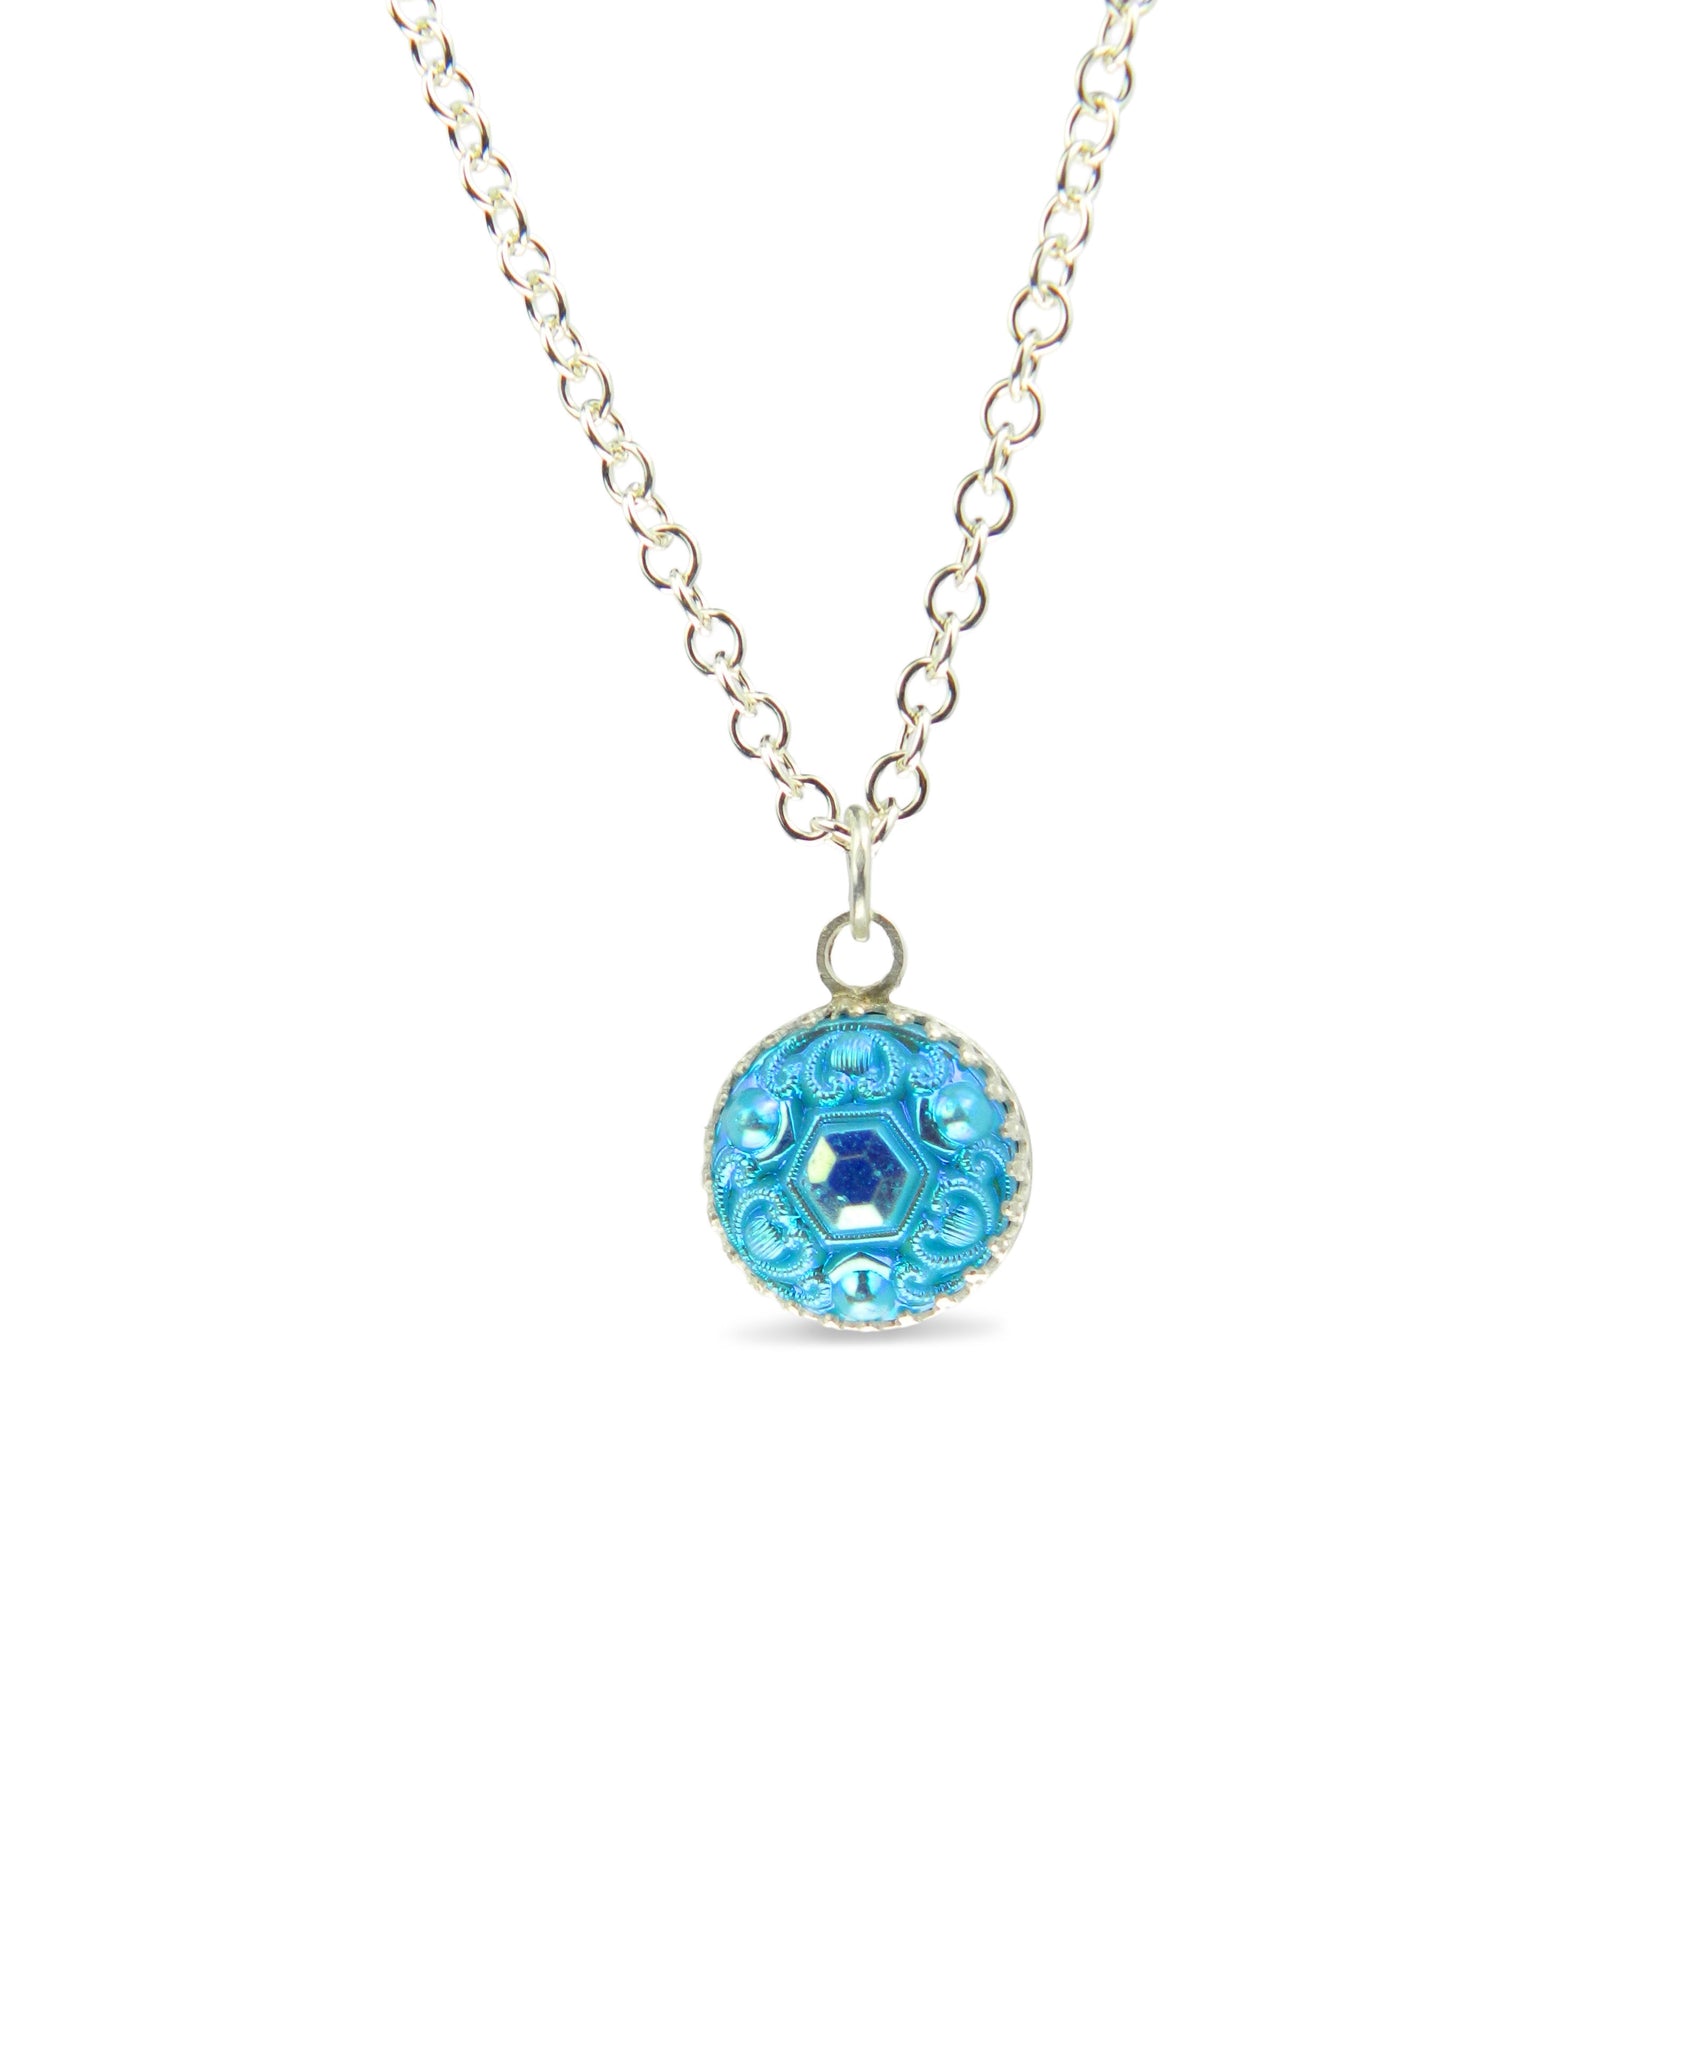 Mid blue pendant and chain